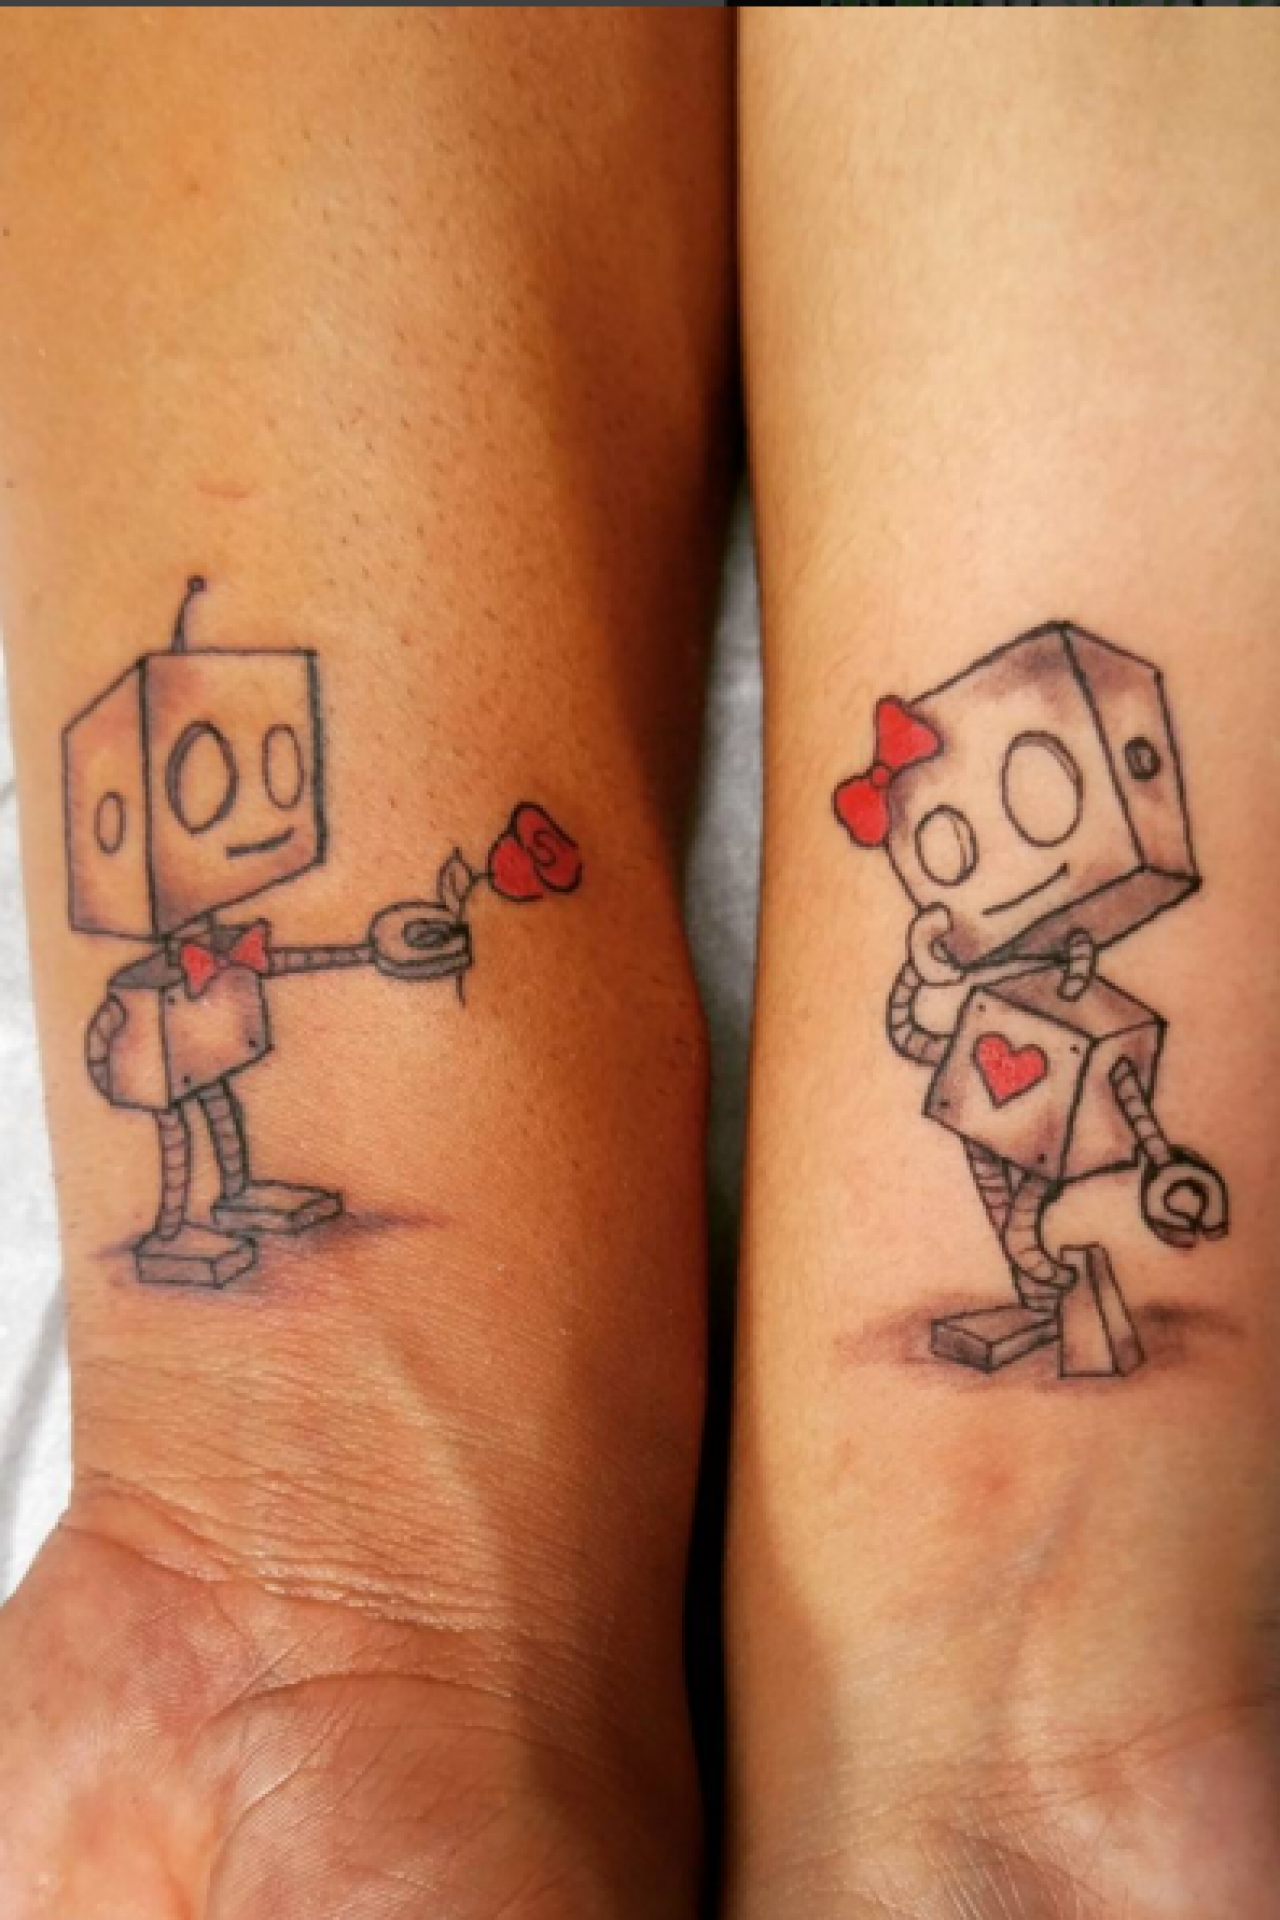 Couple Tattoos That Will Stand The Test of Time | A Practical Wedding